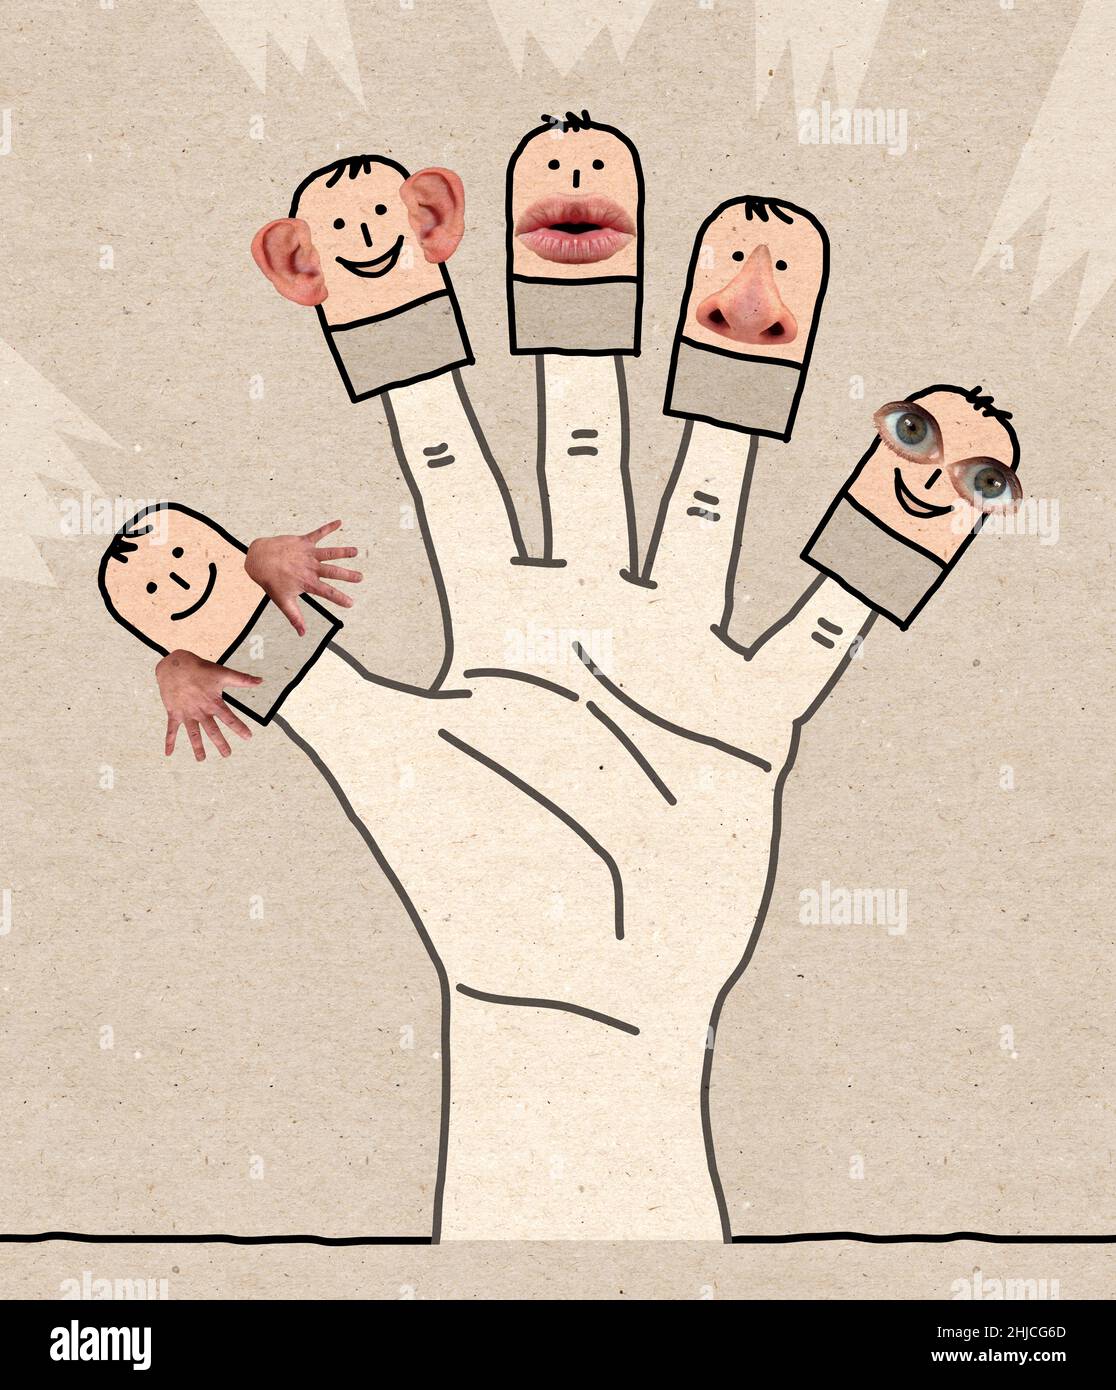 Big Hand with Cartoon Characters and Five Senses collage Stock Photo - Alamy